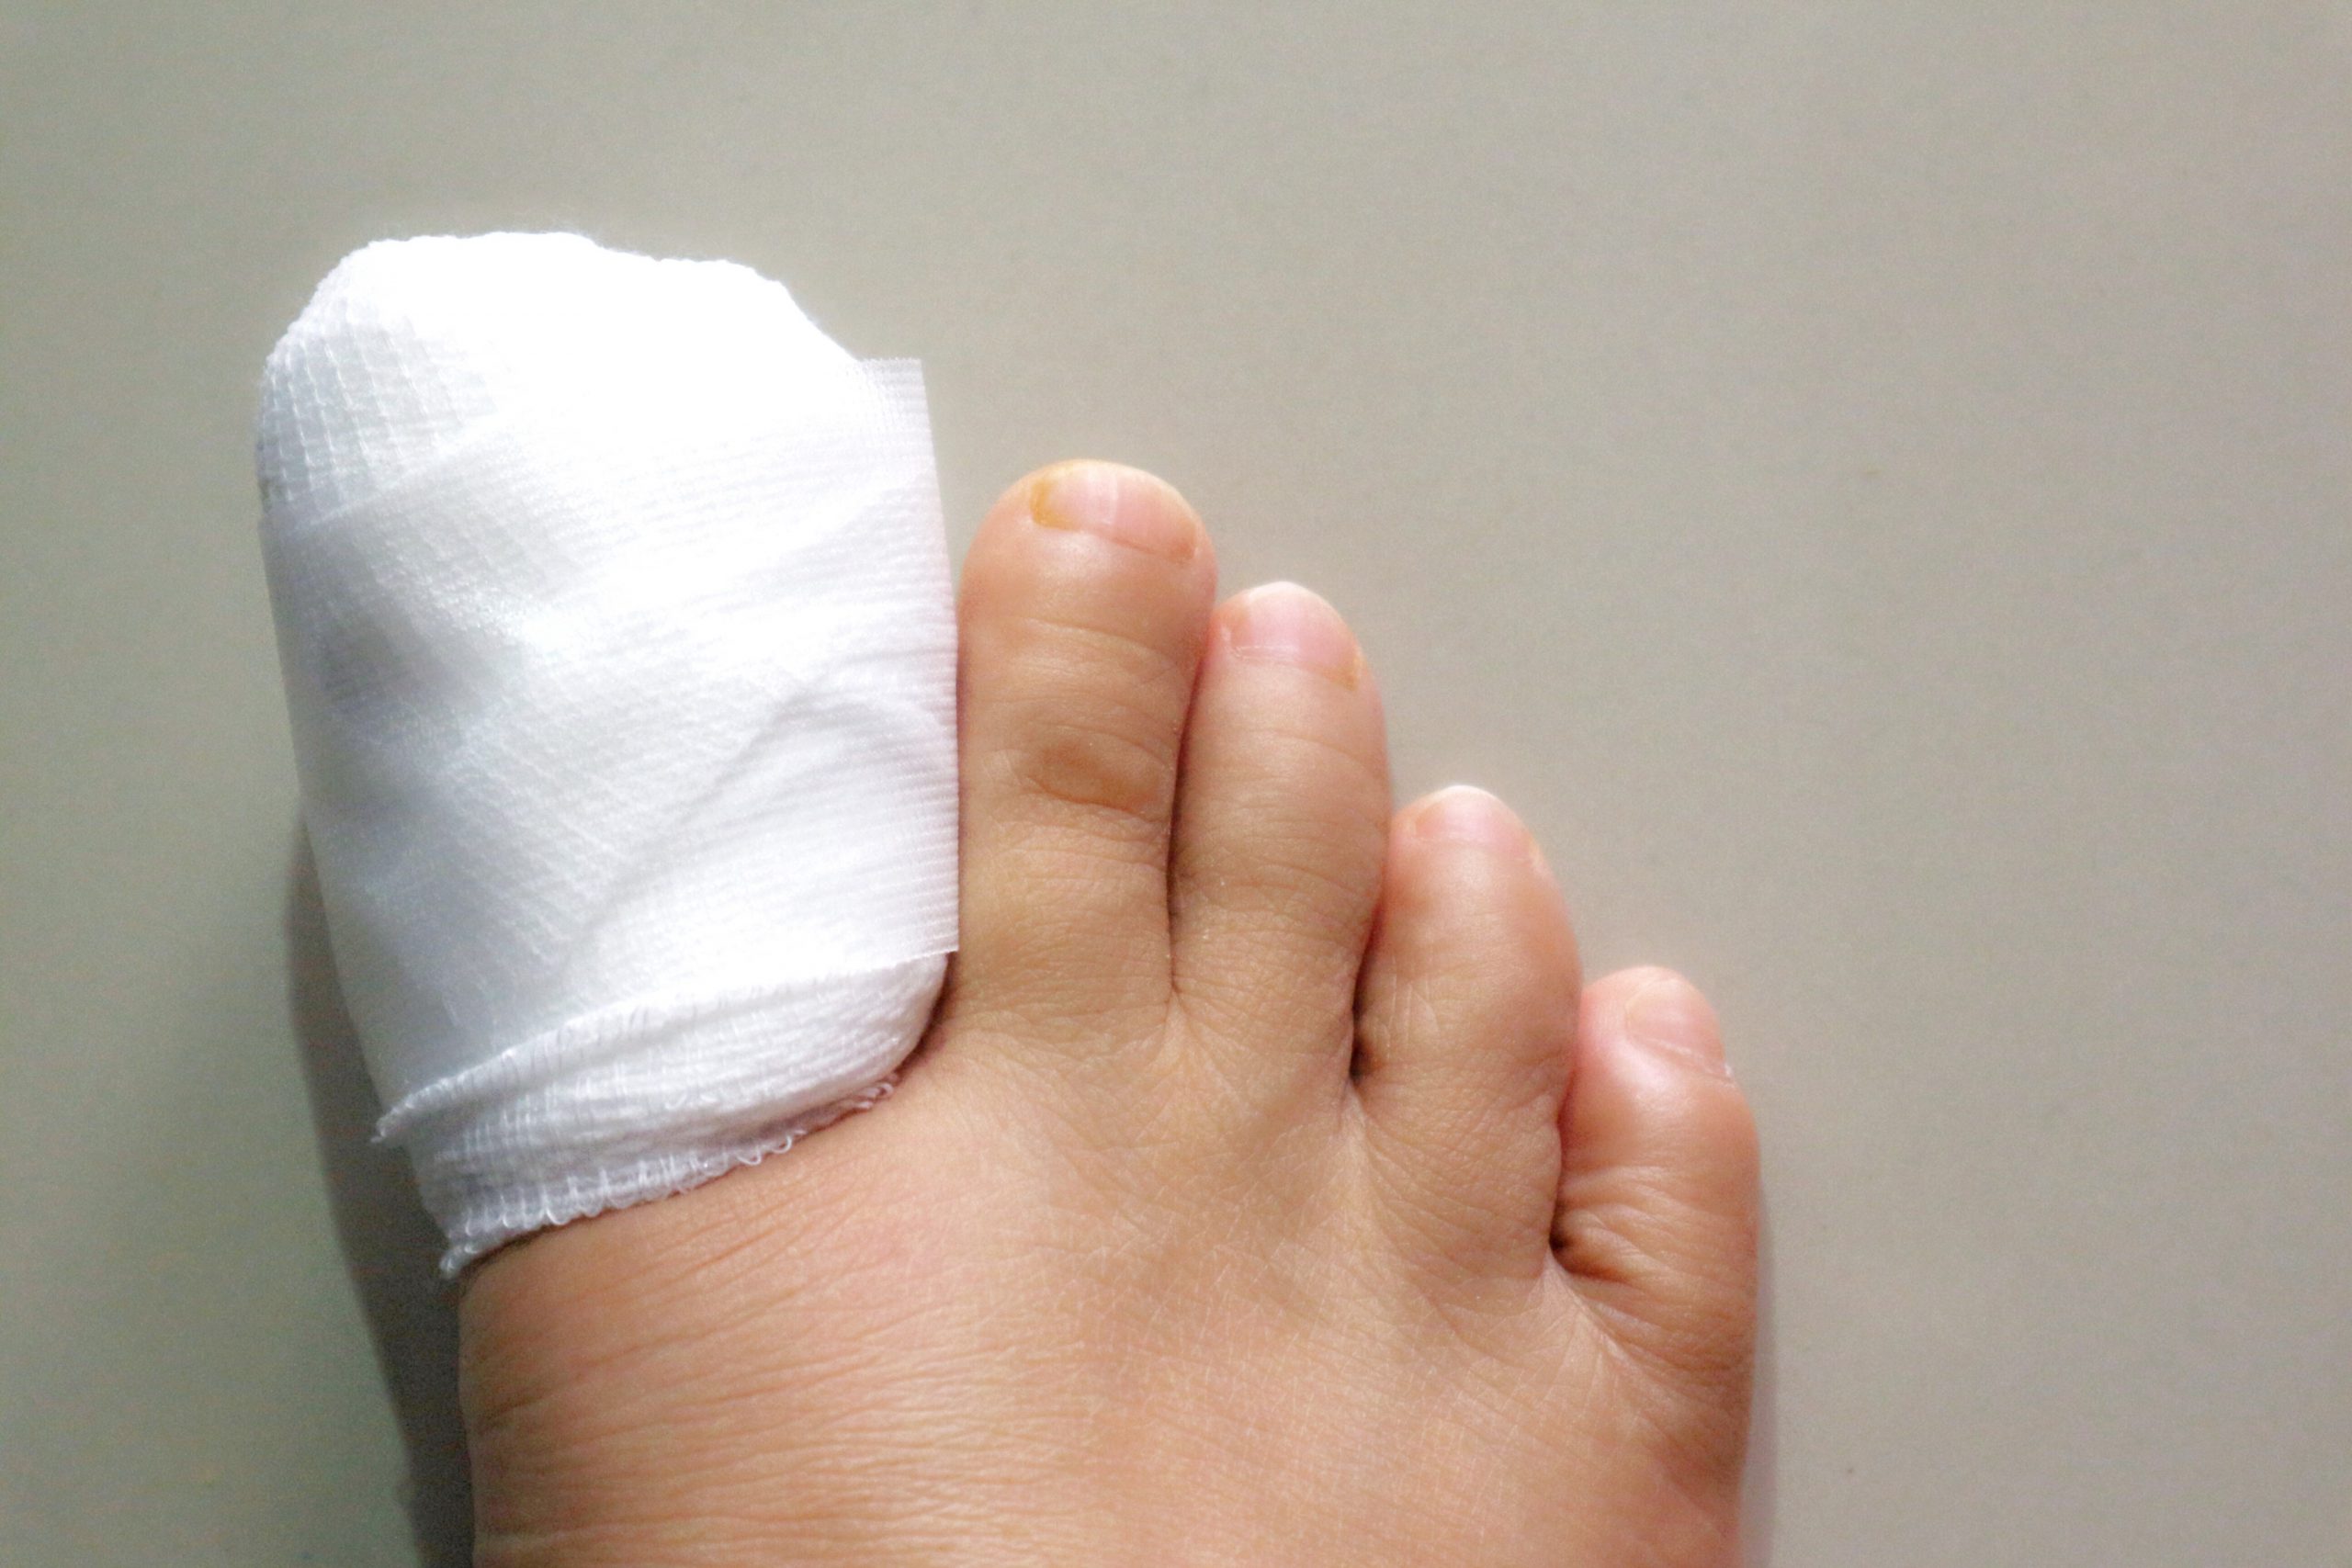 A human foot with the big toe wrapped in white gauze.